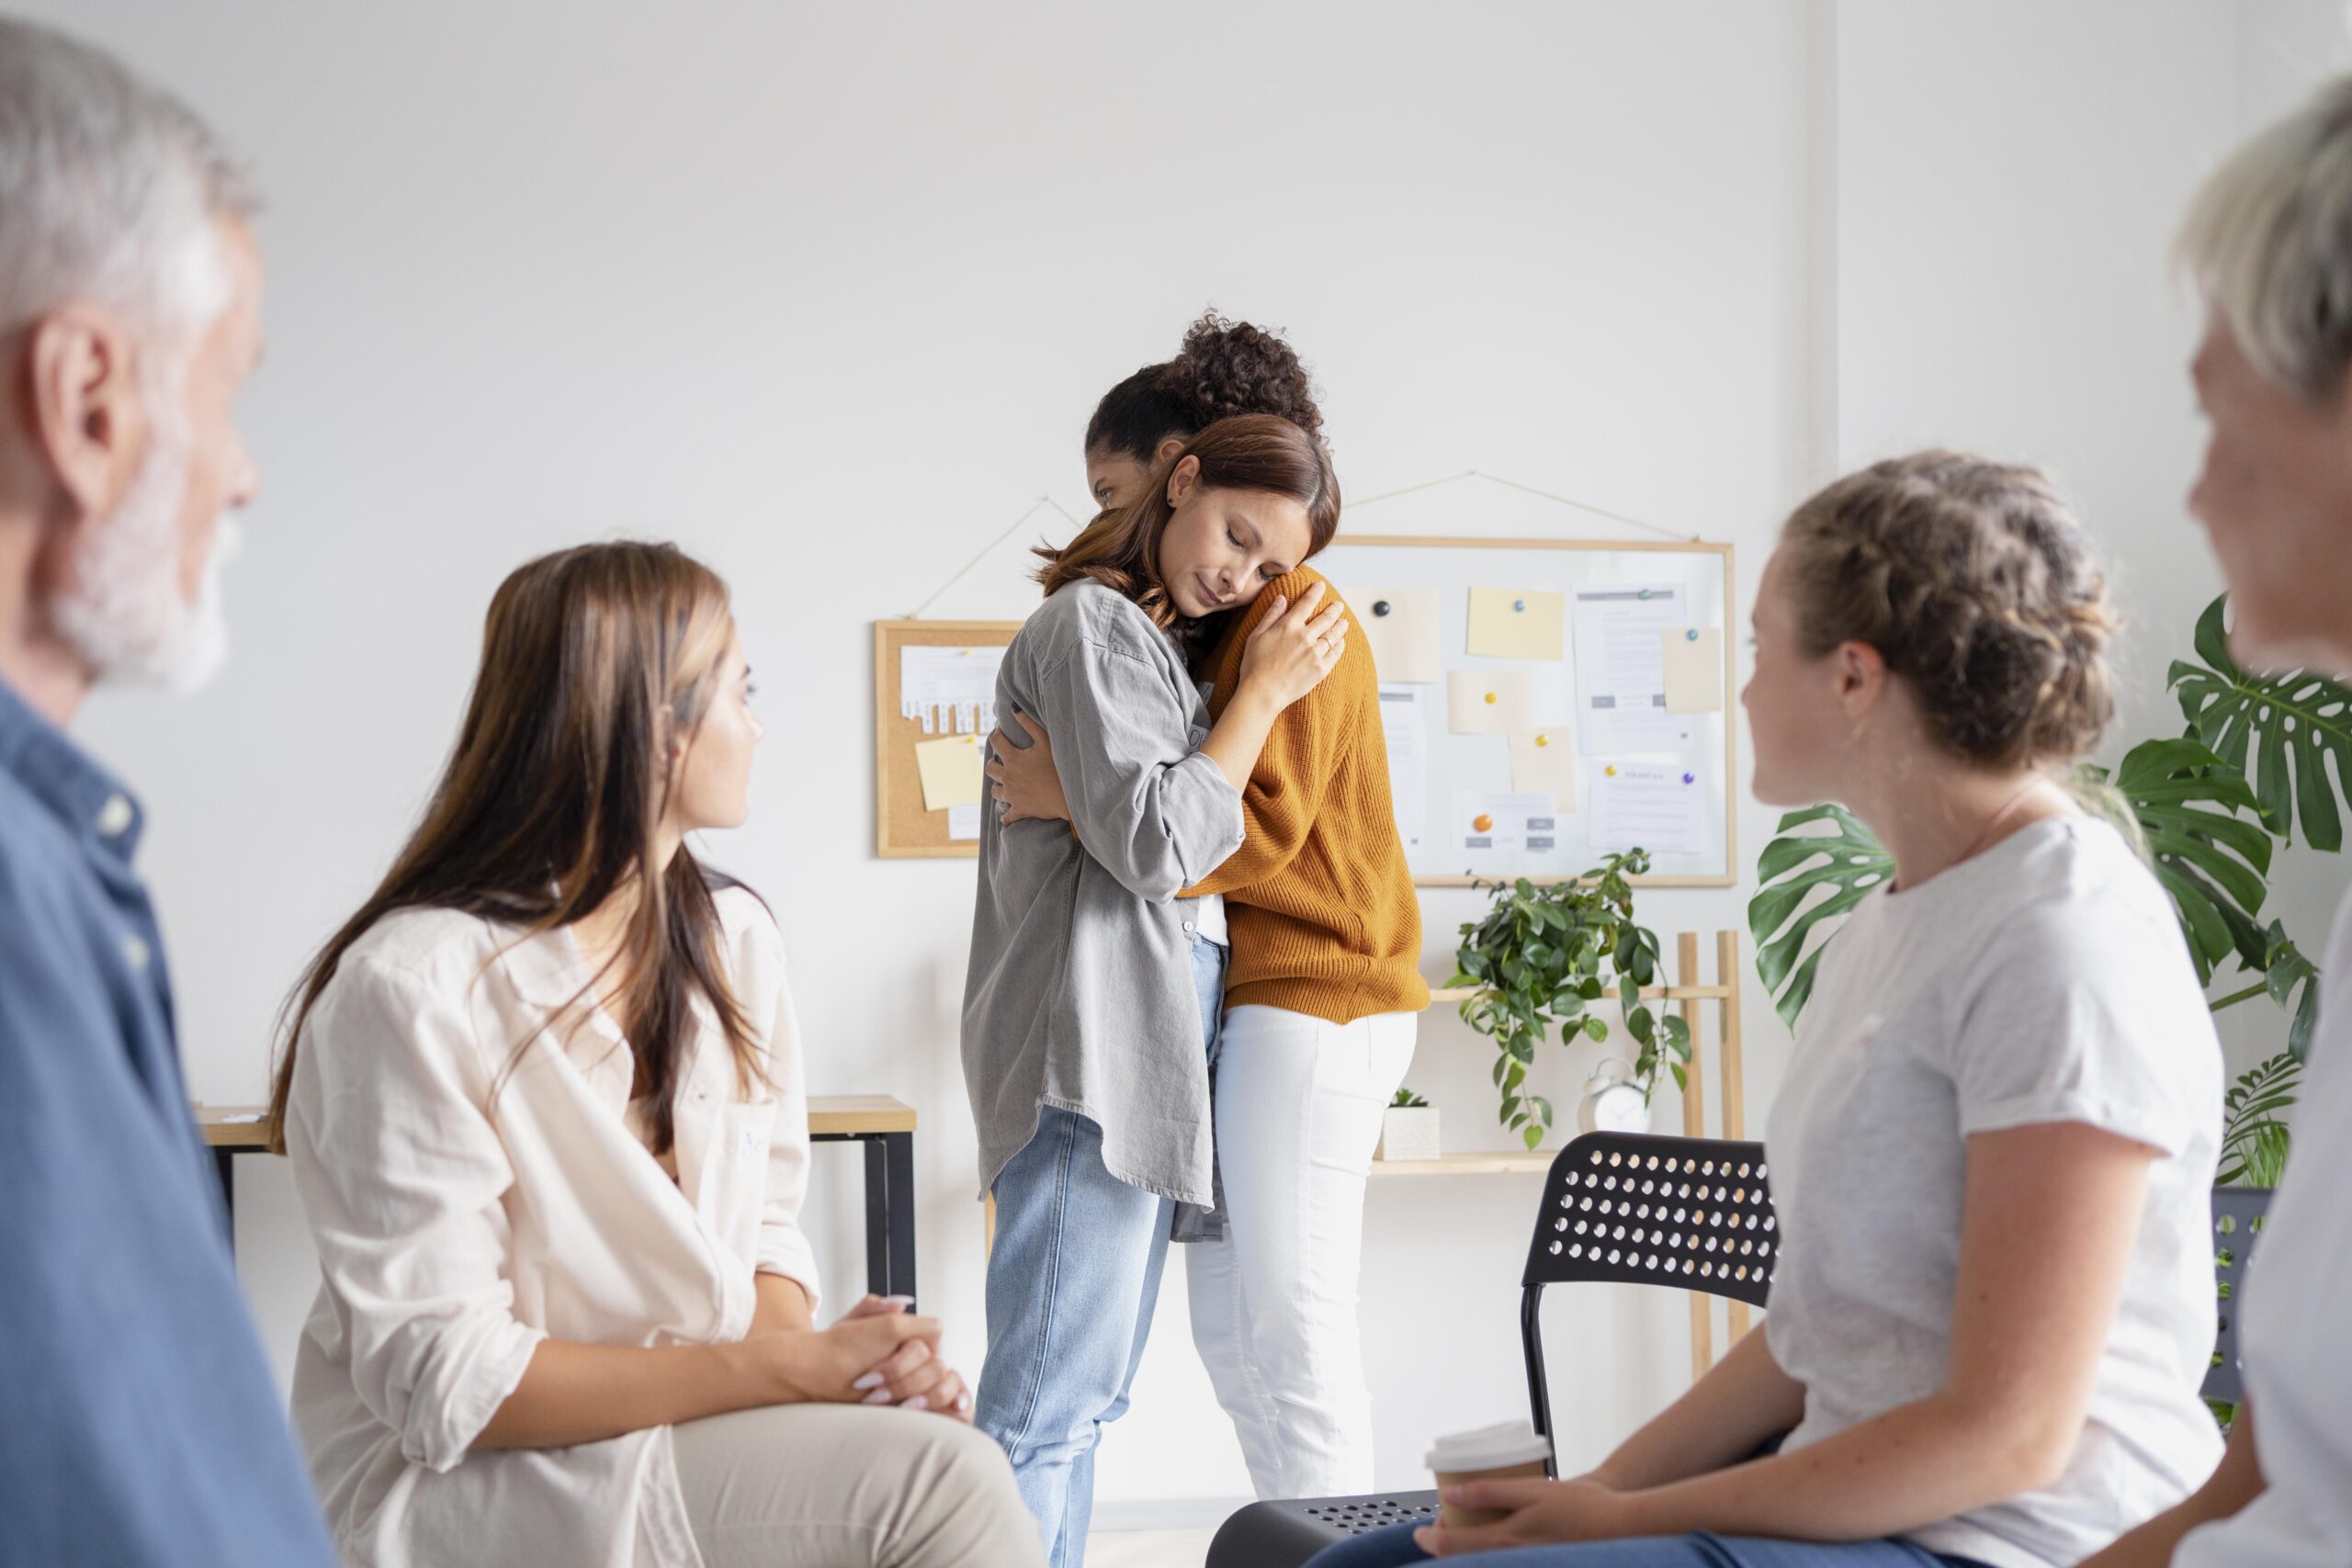 Group therapy helps to deal with loneliness via self-connection and connection to others. 